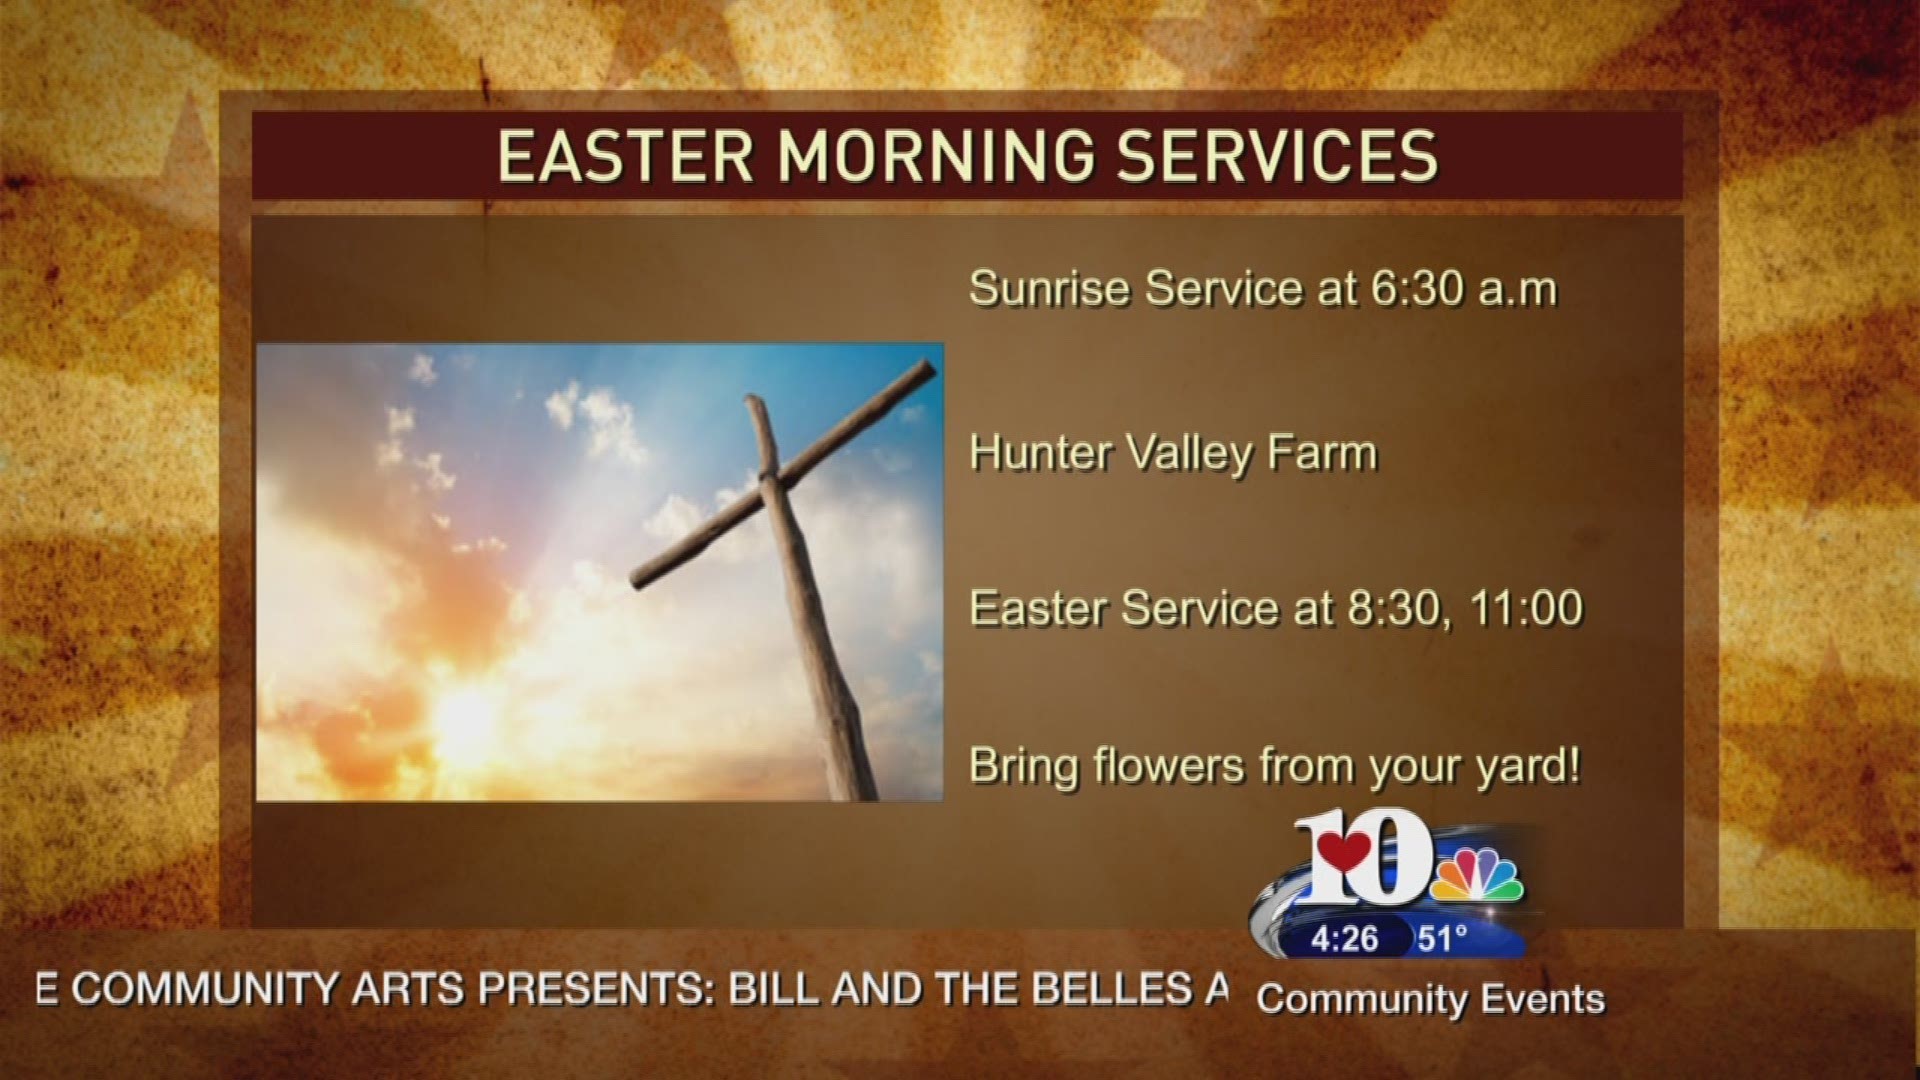 Sequoyah Hills Presbyterian is celebrating the holiest day of the Christian calendar by offering a Sunrise Service at Hunter Valley Farms, followed by a butterfly release during services back at the sanctuary.